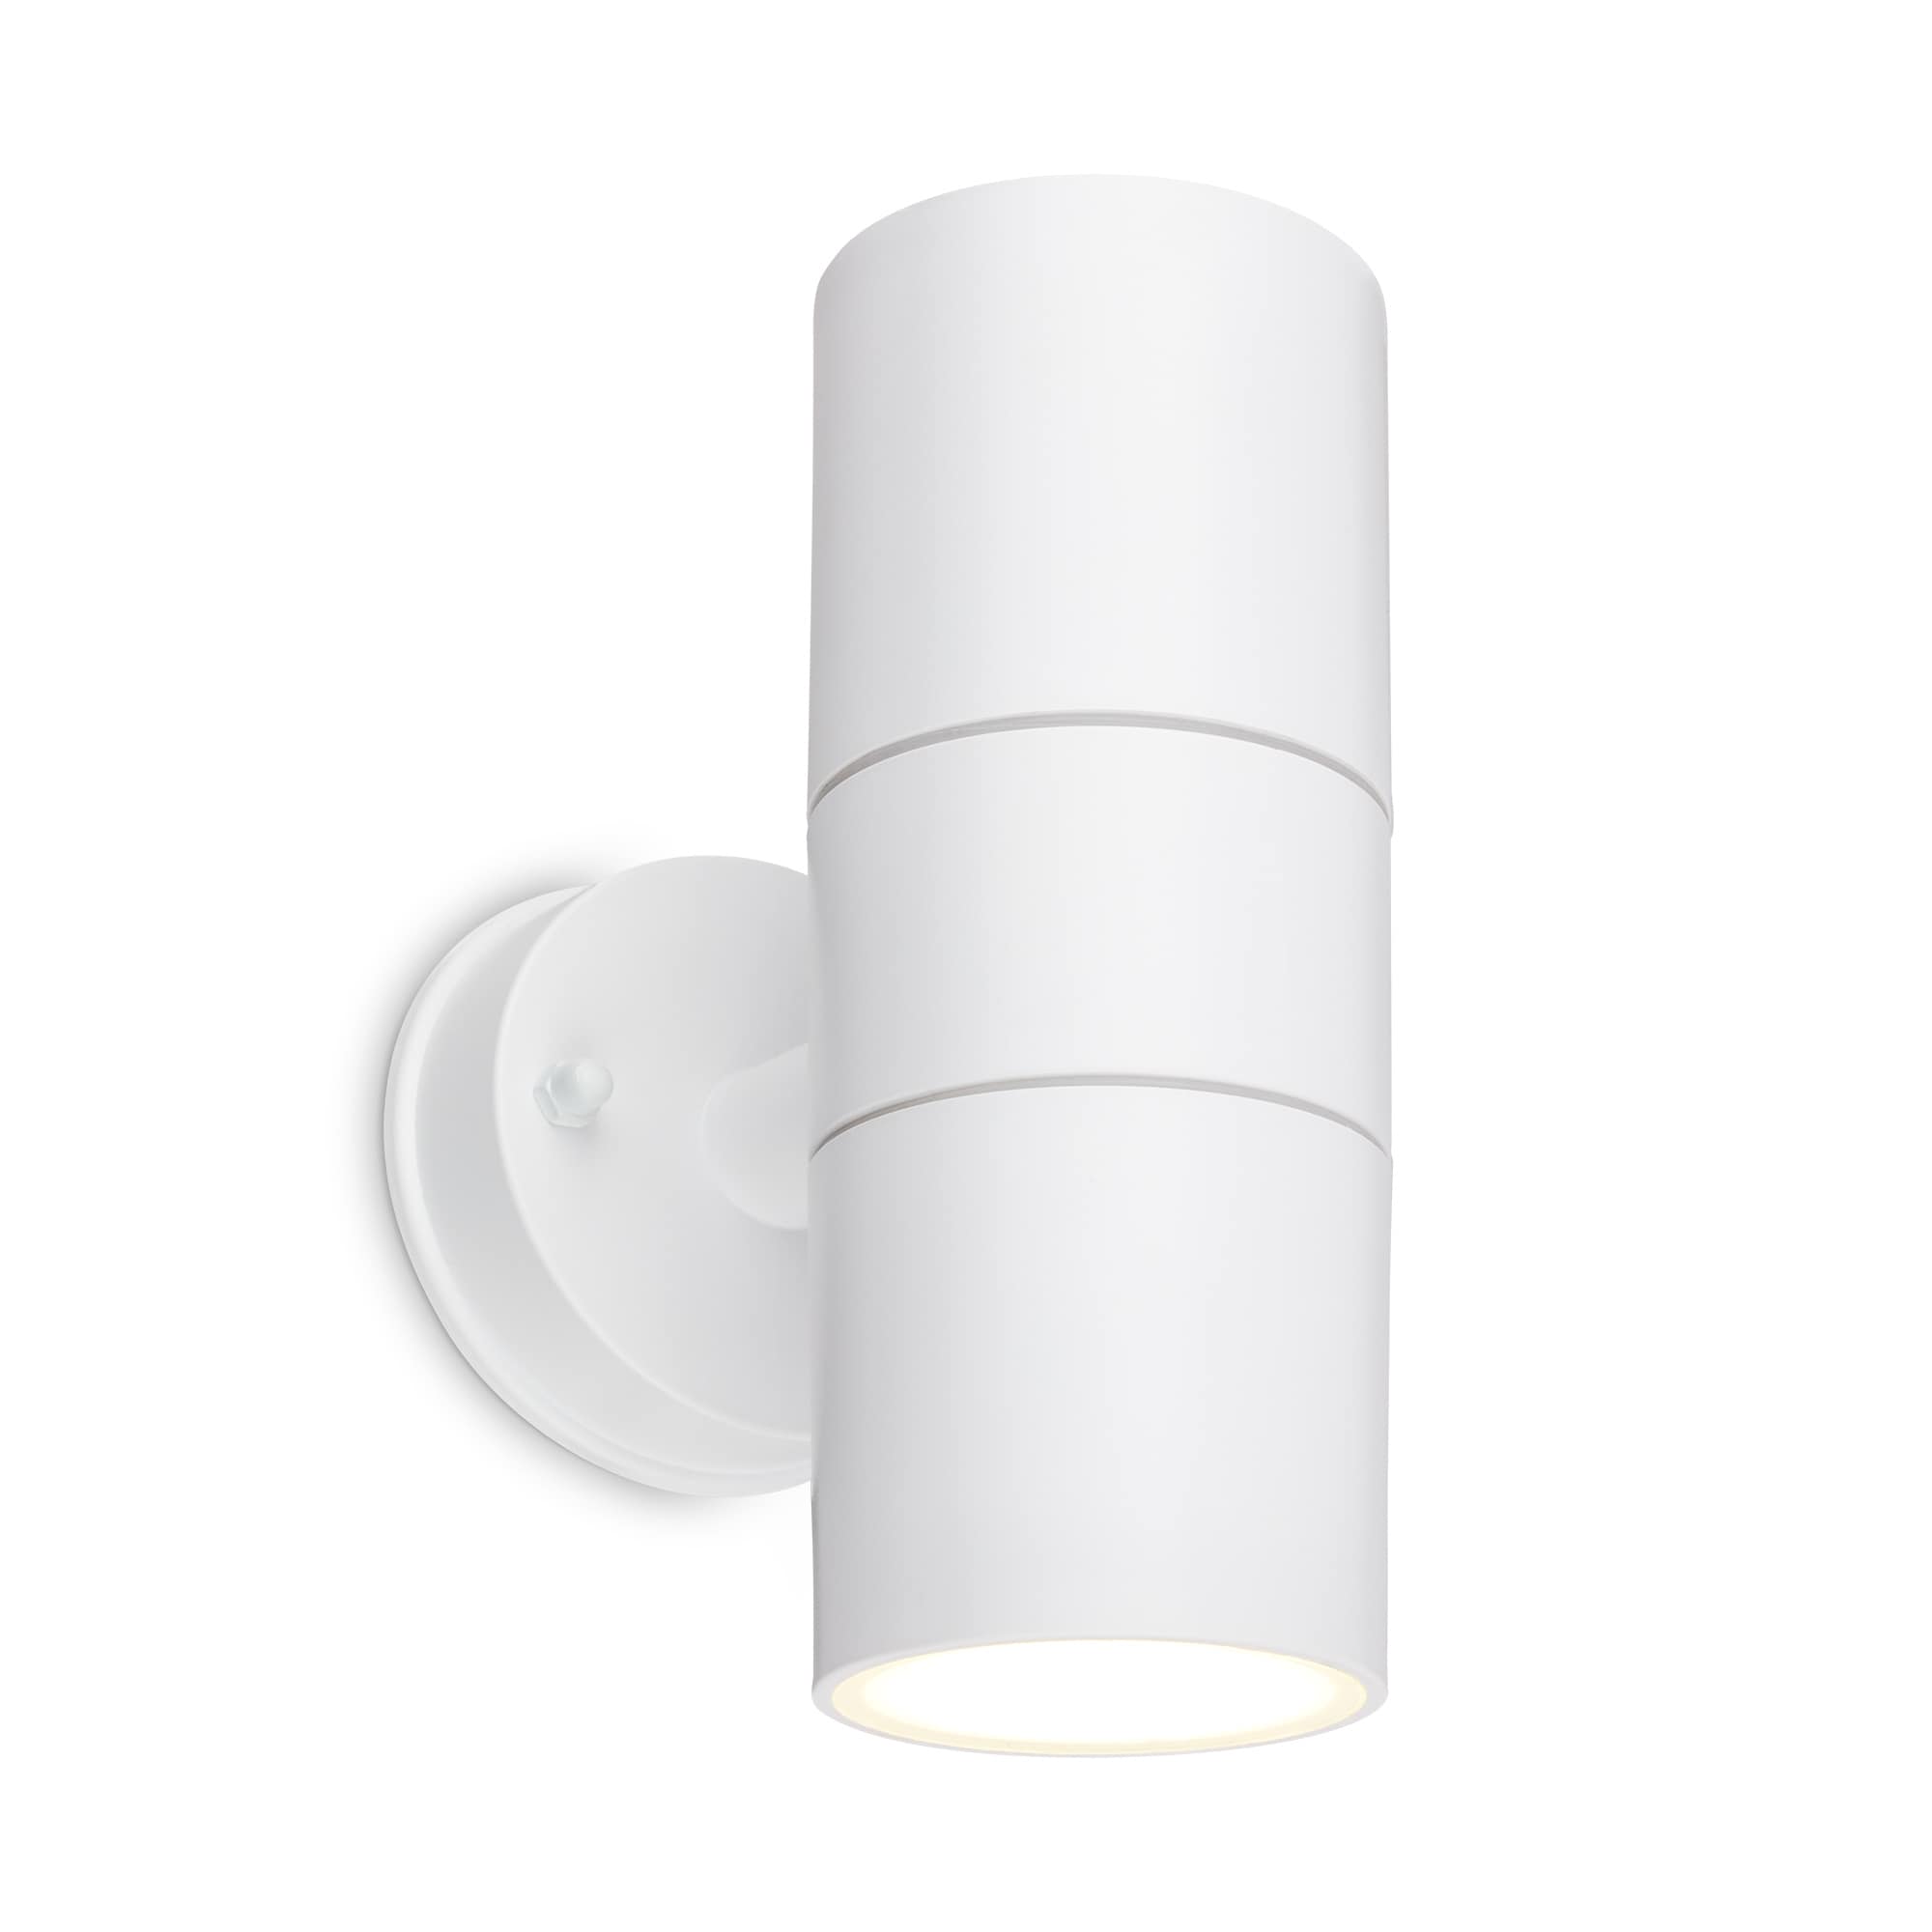 Briloner LED wall lamp, splash water and dust protection, up & downlight